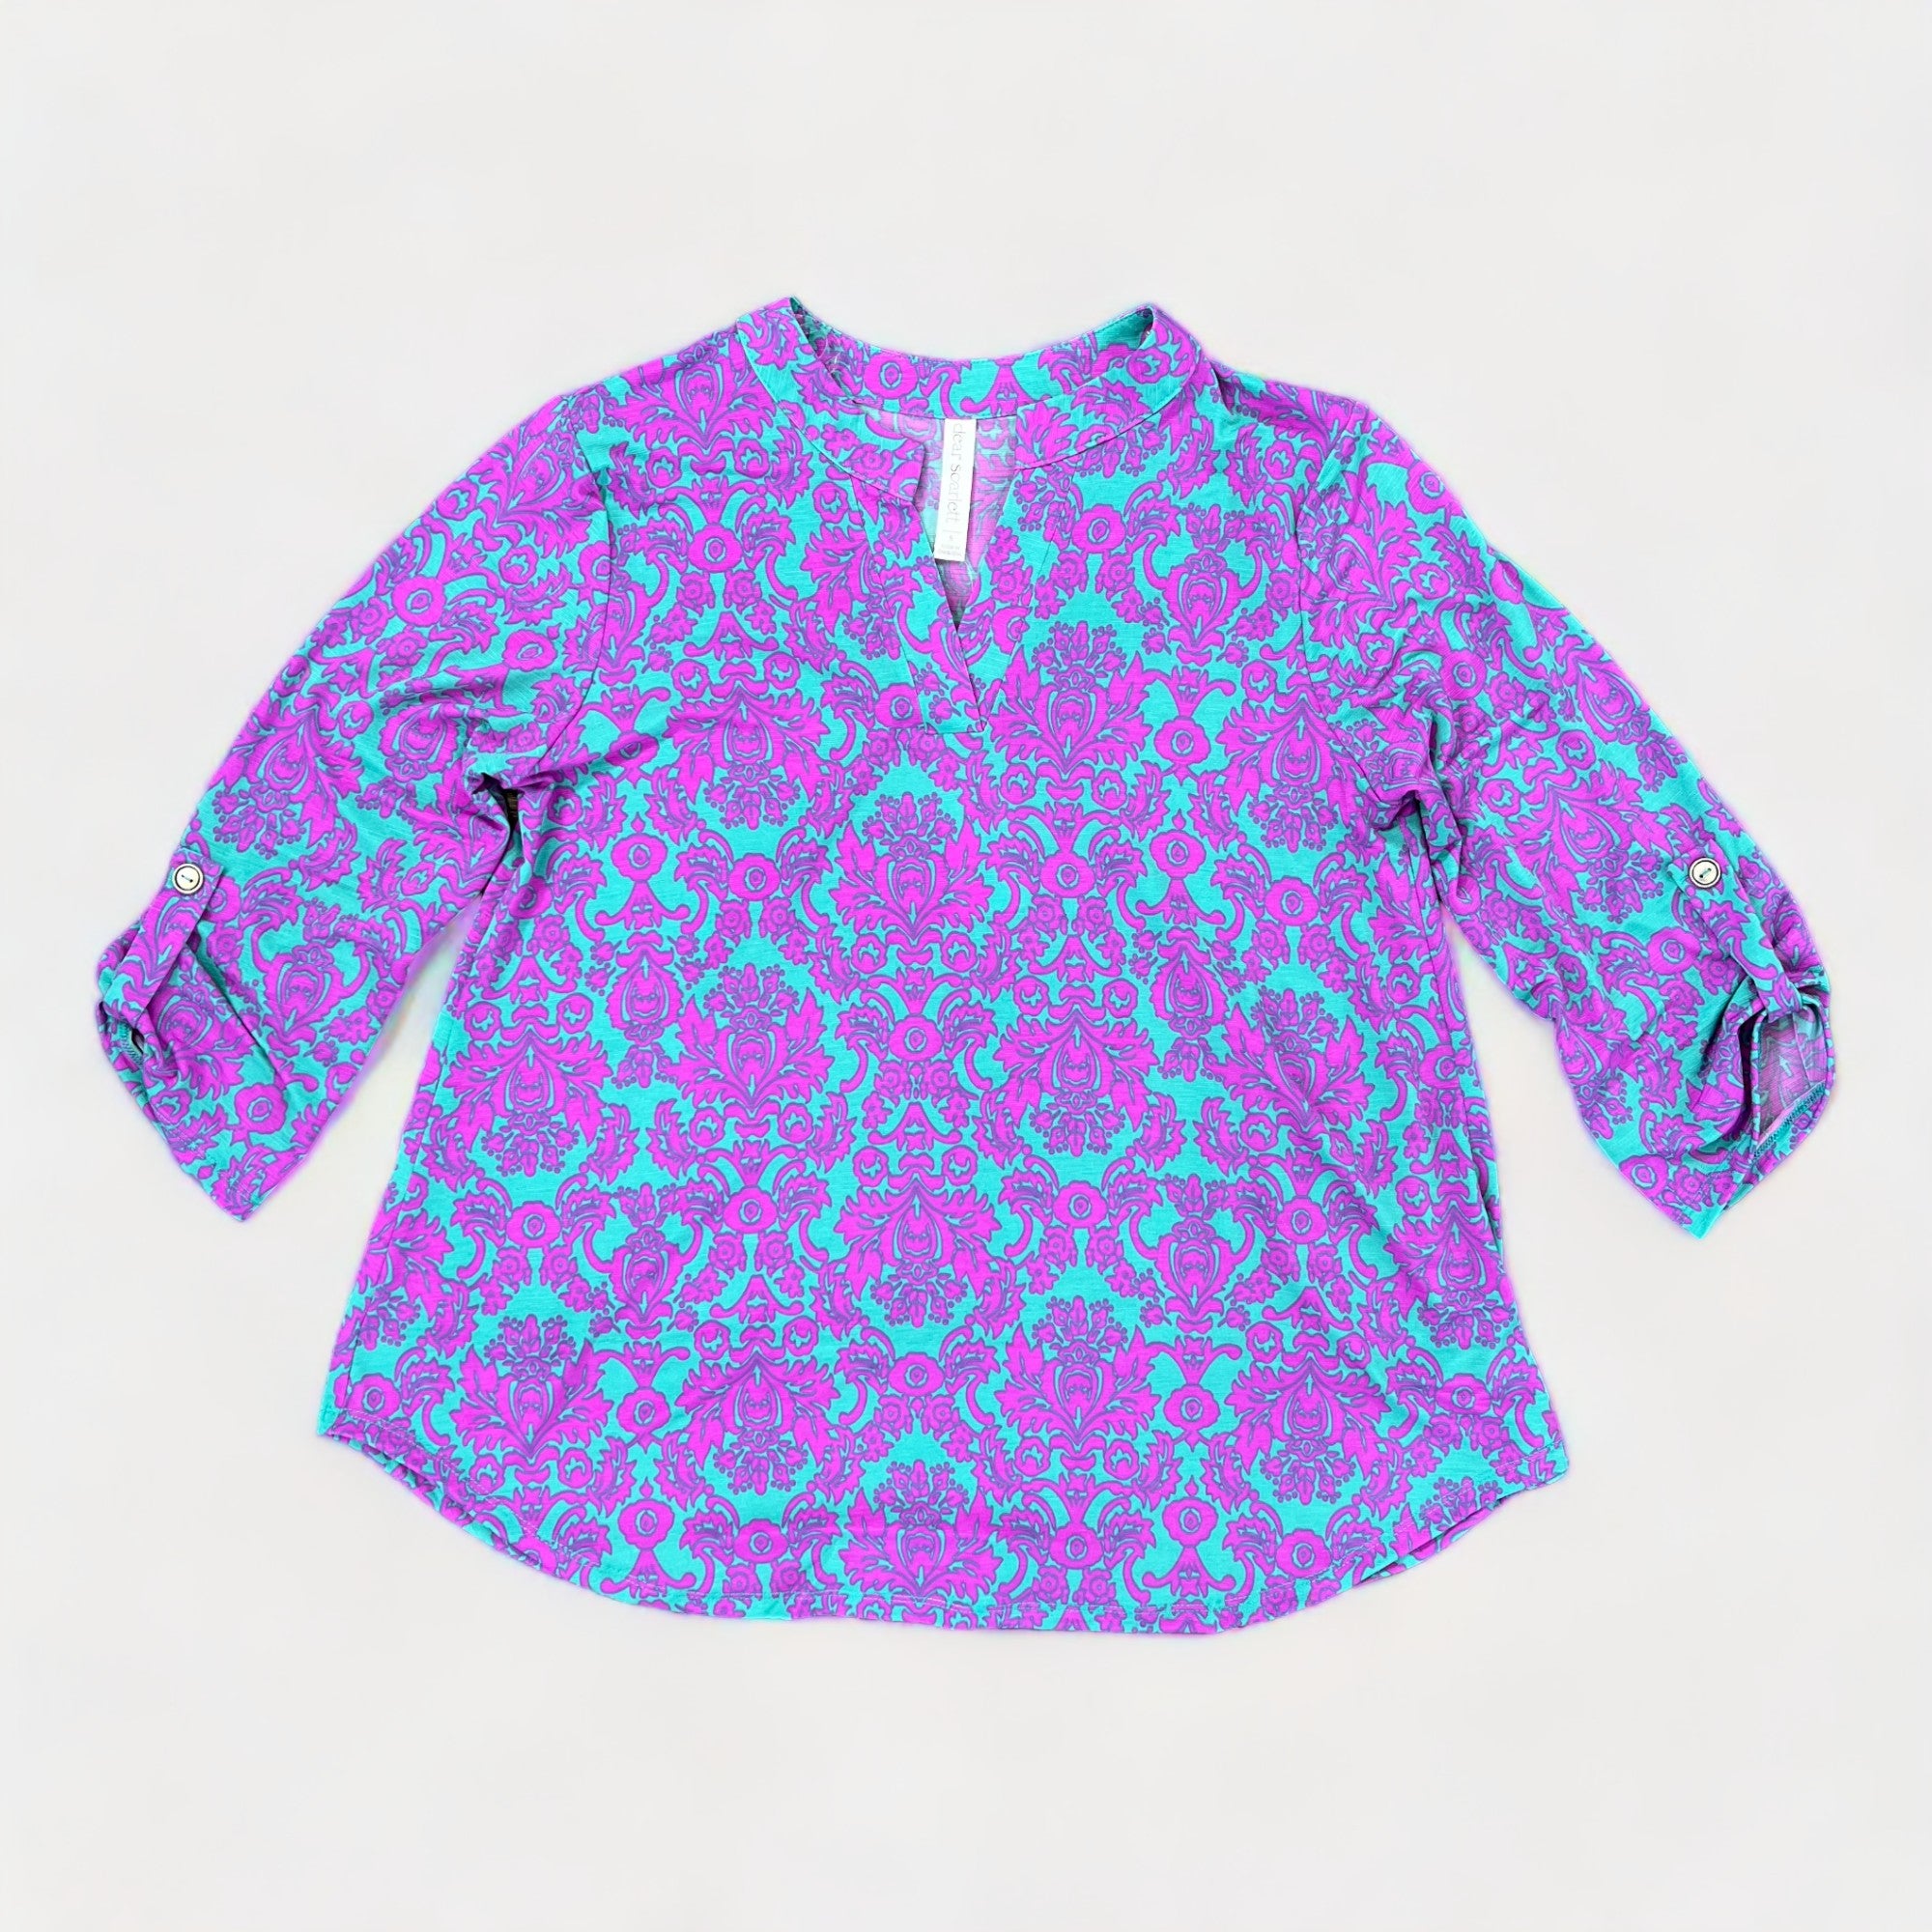 Teal Damask Lizzy Top